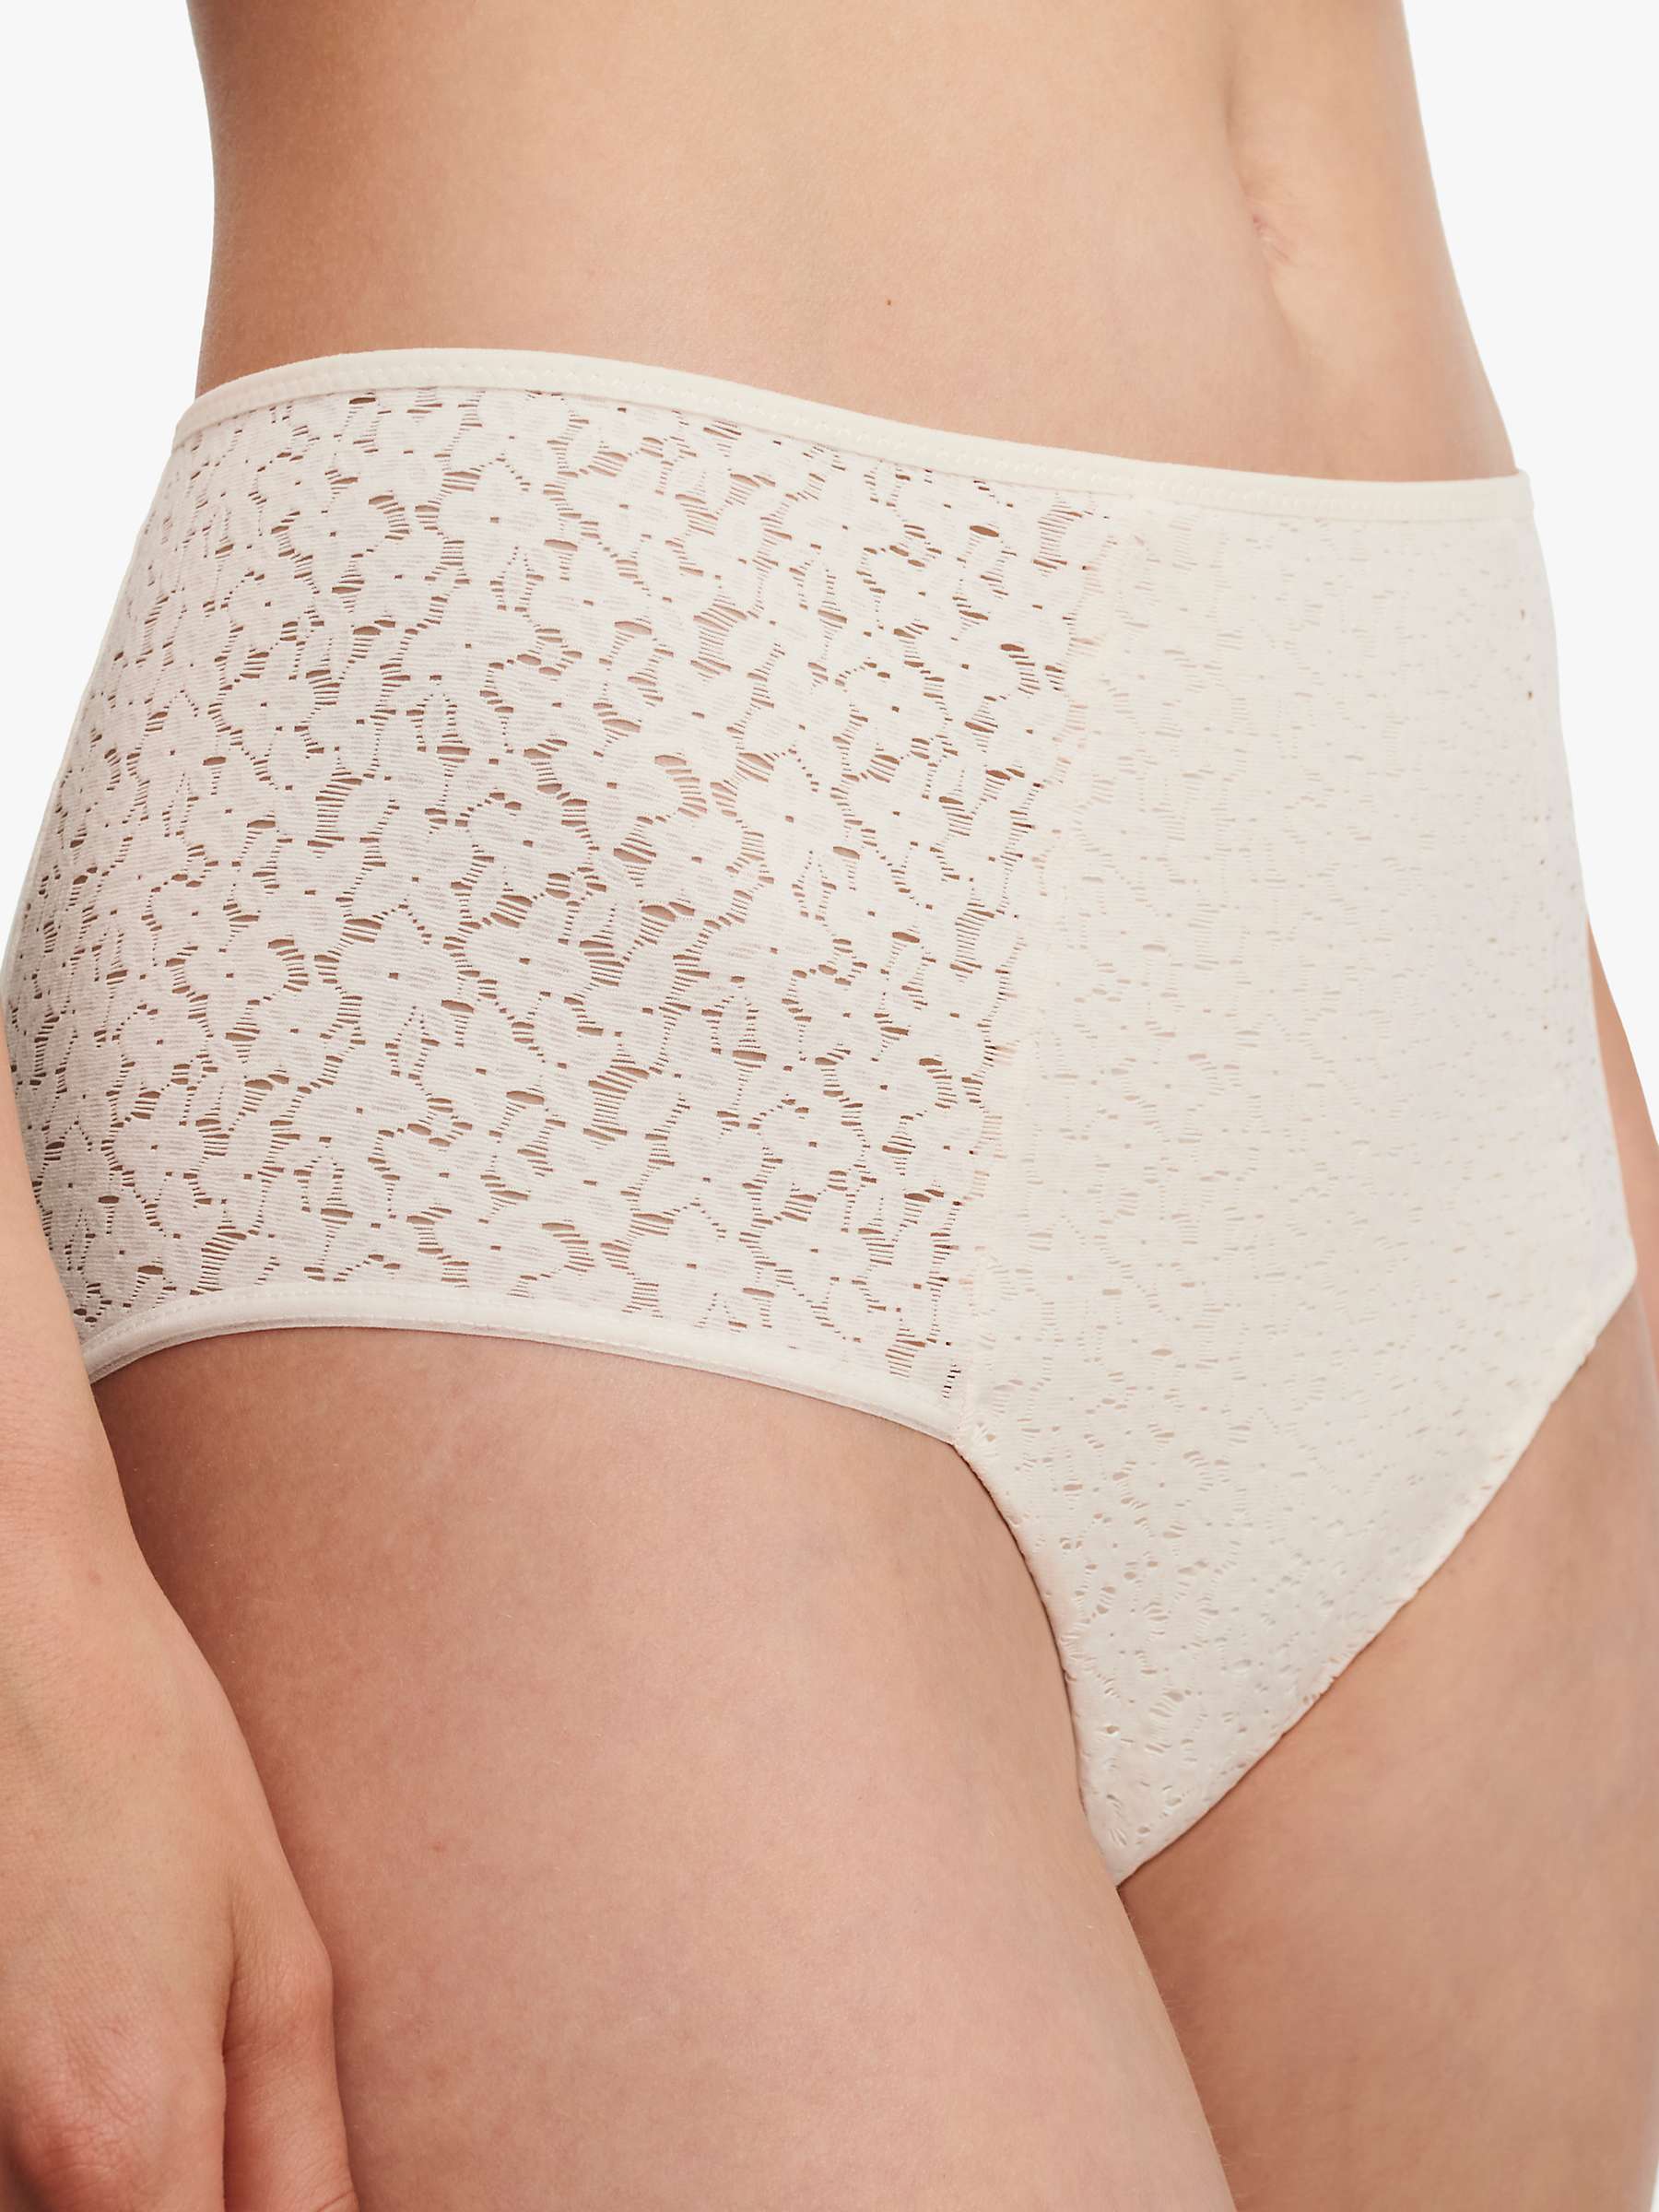 Buy Chantelle Norah Comfort High Waisted Knickers Online at johnlewis.com